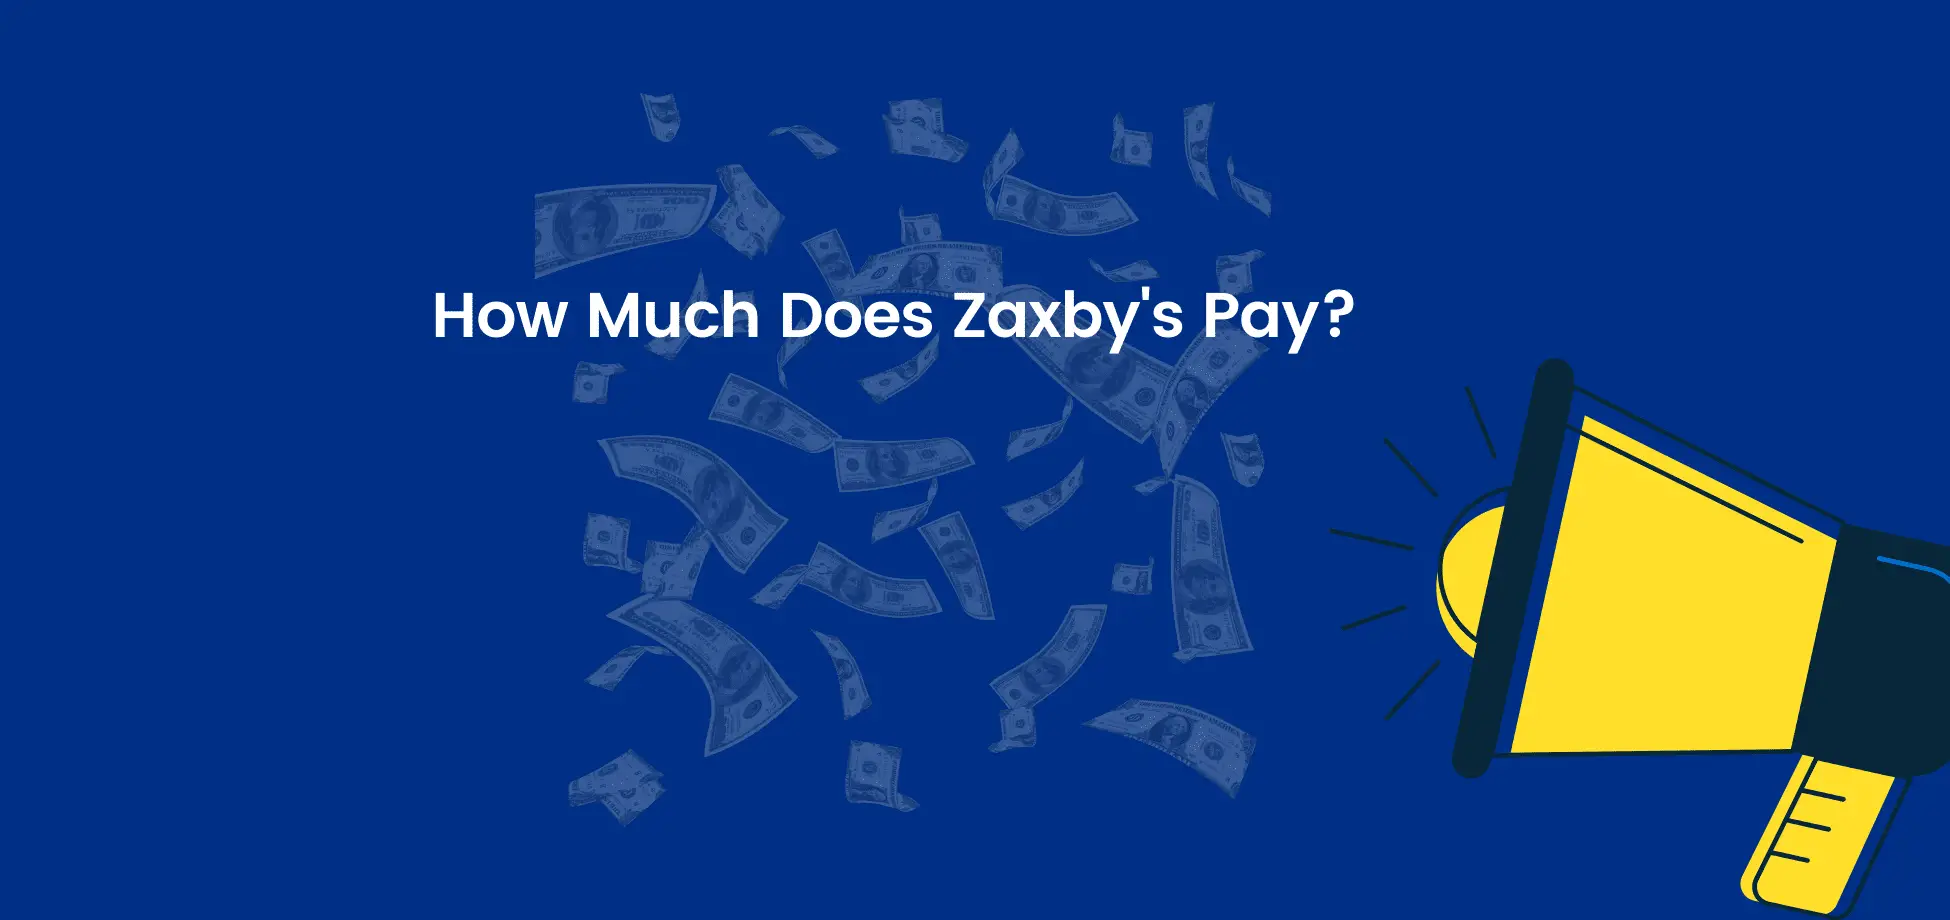 Here is Zaxby's starting pay, on average.